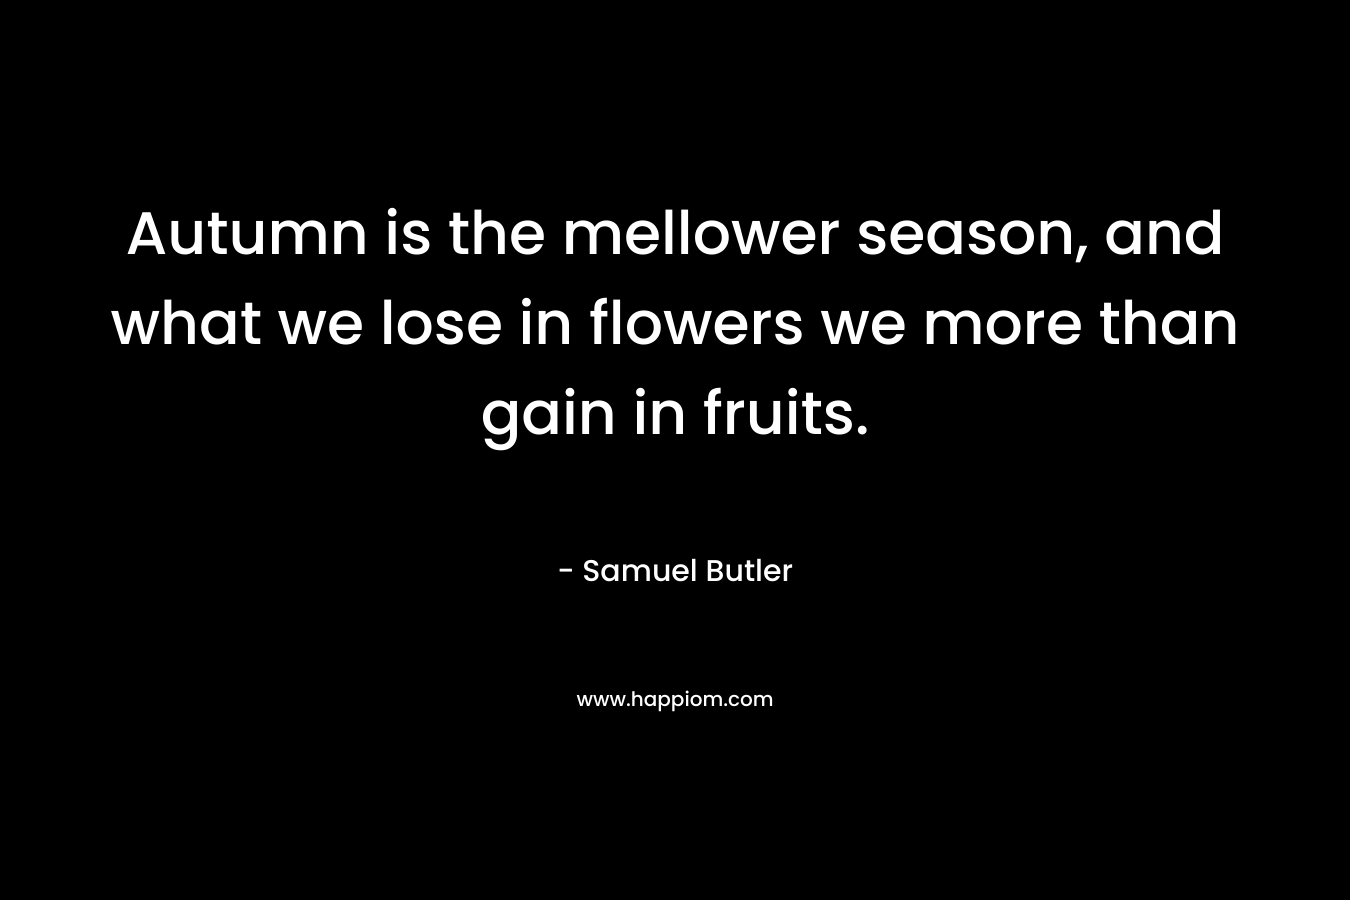 Autumn is the mellower season, and what we lose in flowers we more than gain in fruits. – Samuel Butler